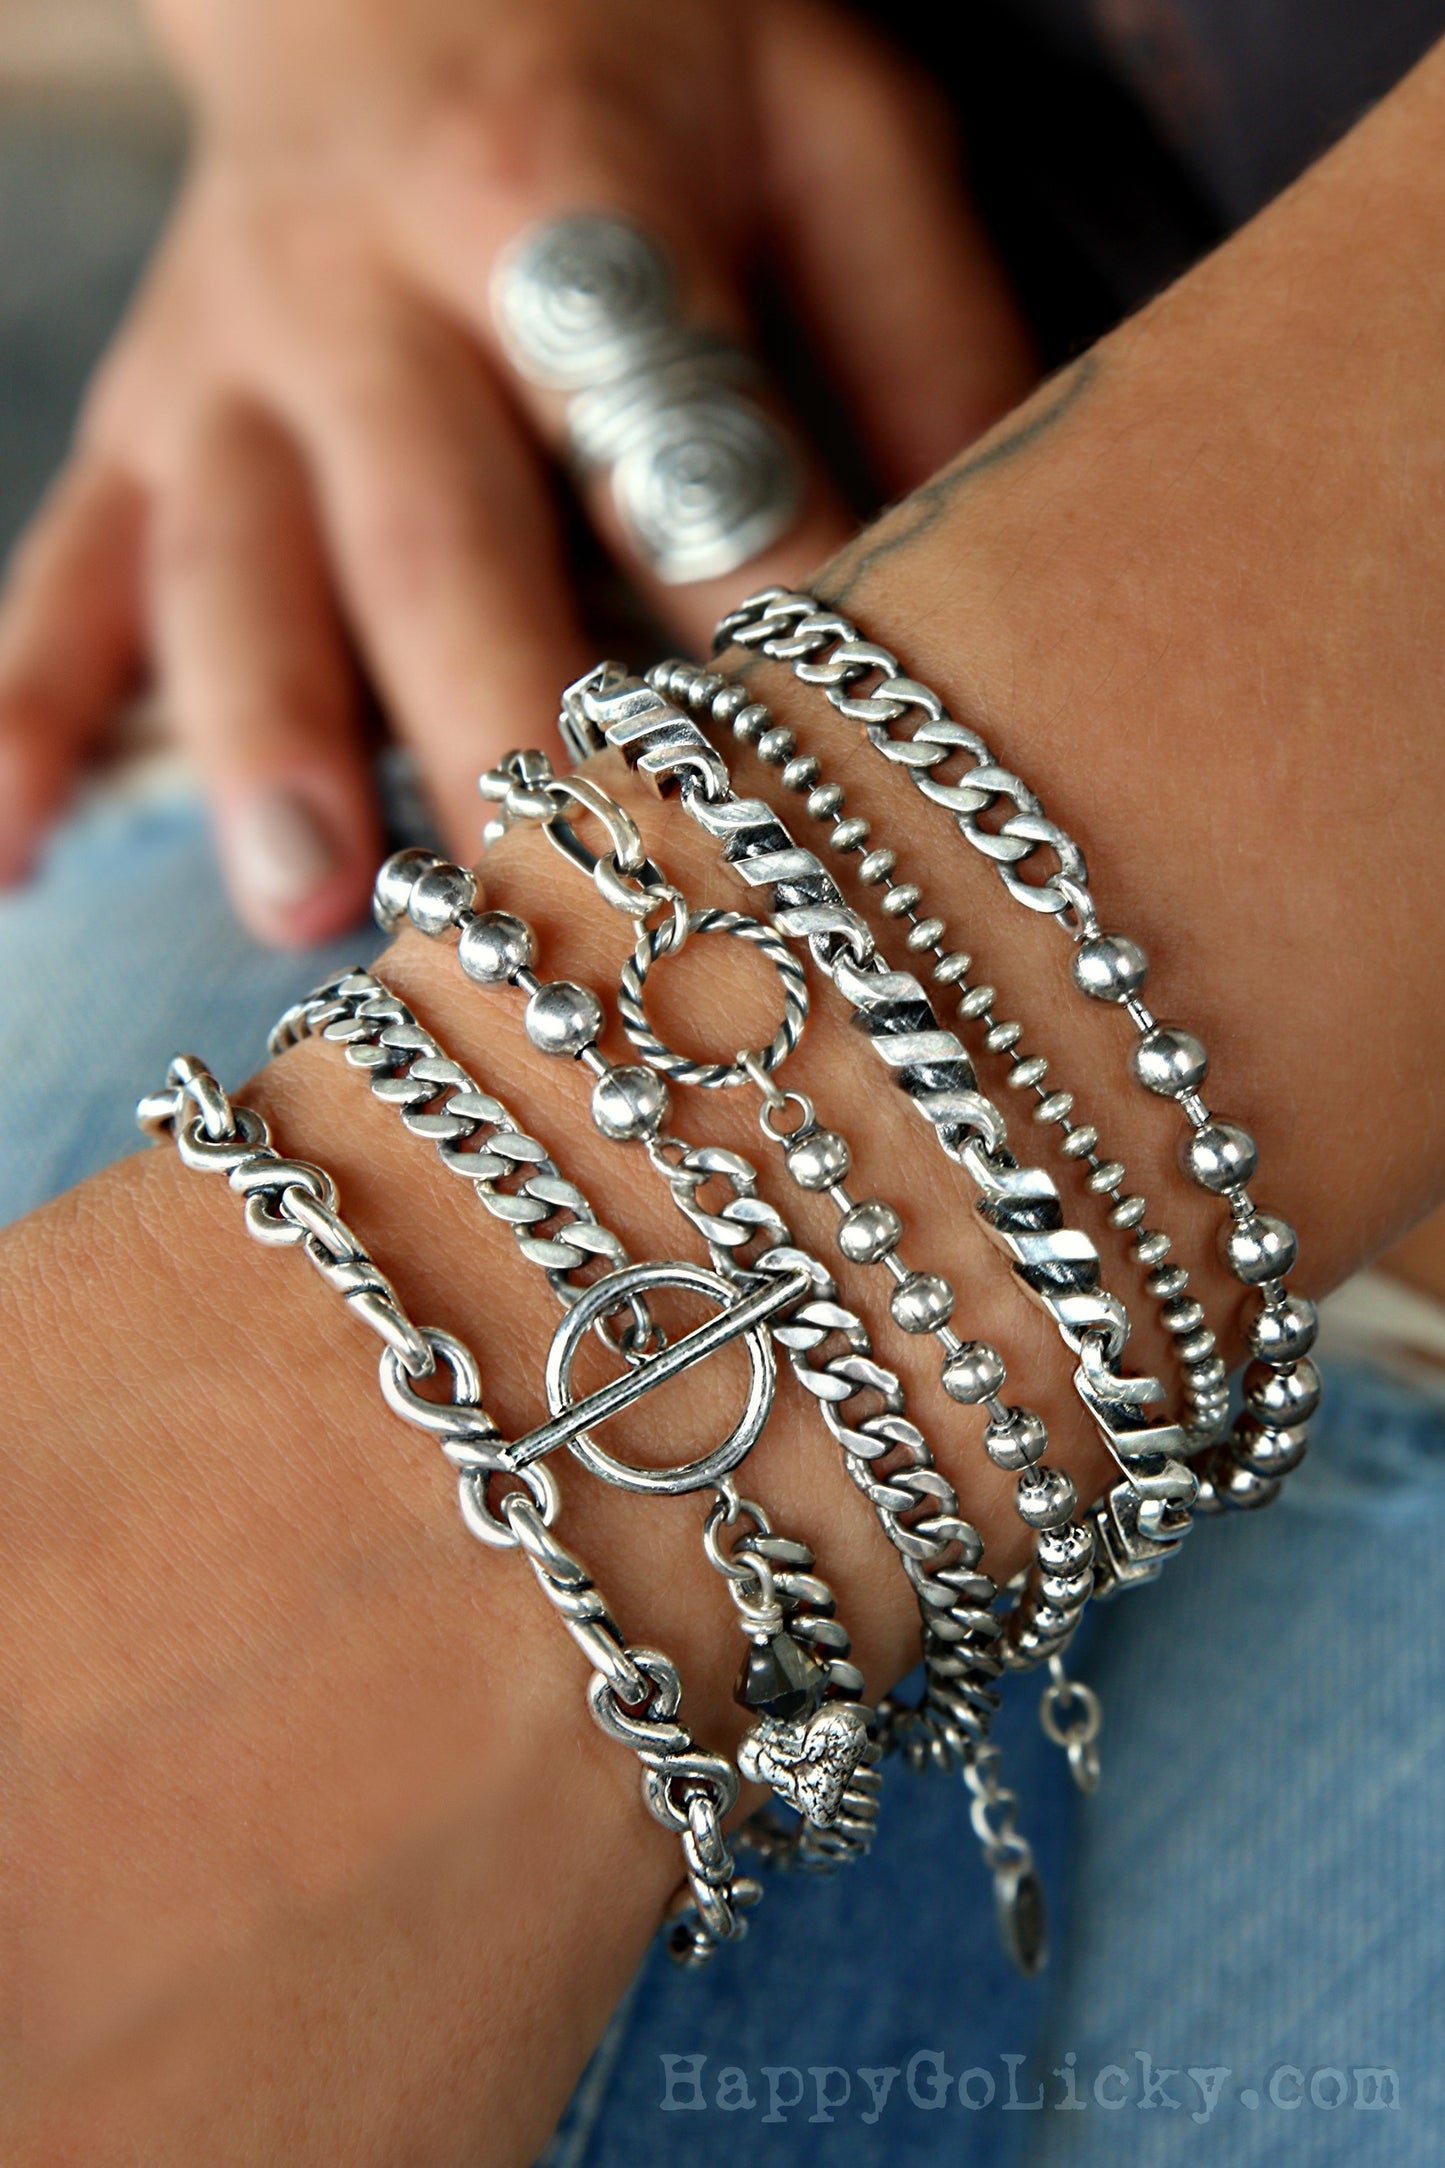 sterling silver bracelet stack with bangles and cuffs by HappyGoLicky Jewelry